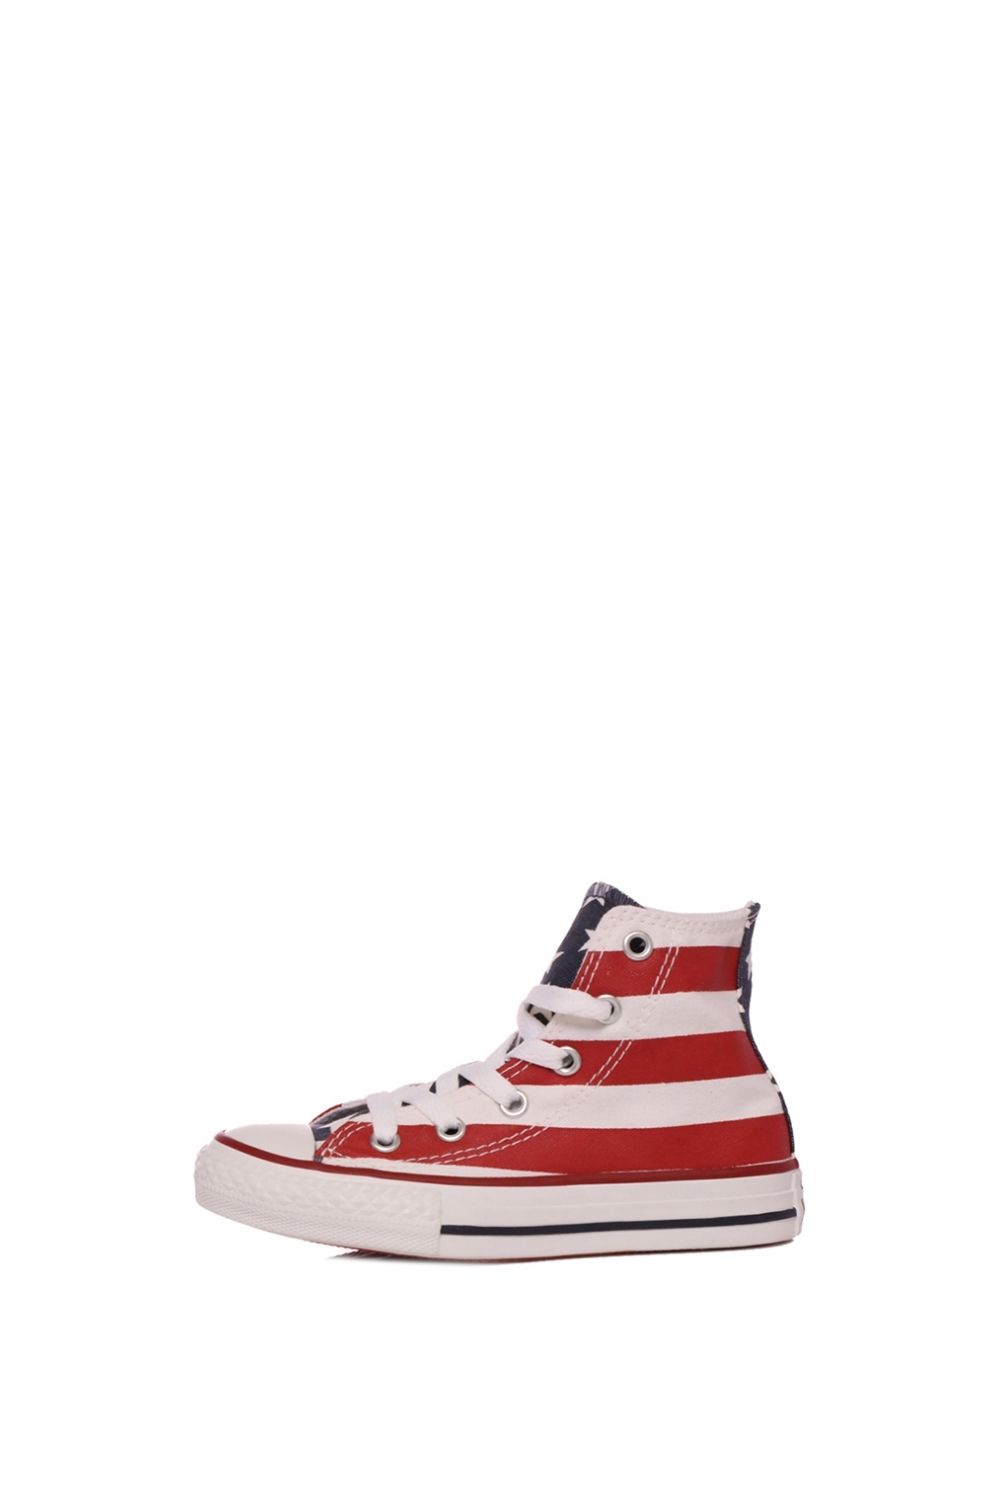 CONVERSE - Παιδικά sneakers Chuck Taylor All Star Hi λευκά κόκκινα Παιδικά/Boys/Παπούτσια/Sneakers